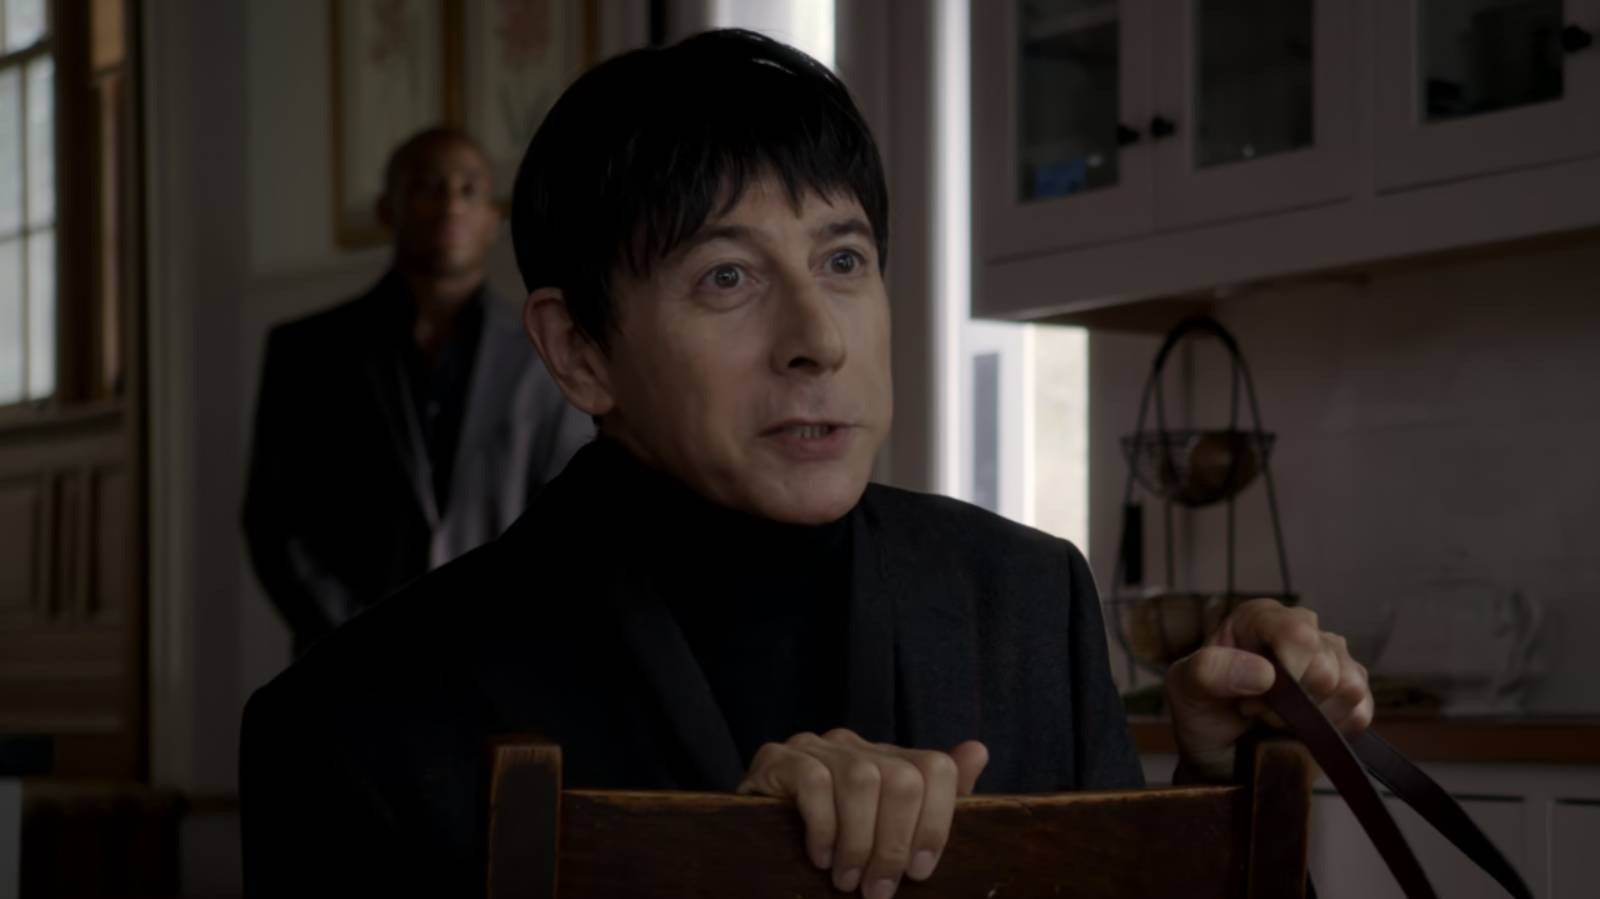 Was The Blacklist’s Mr. Vargas Specifically Created For Pee-Wee’s Paul Reubens? – Looper